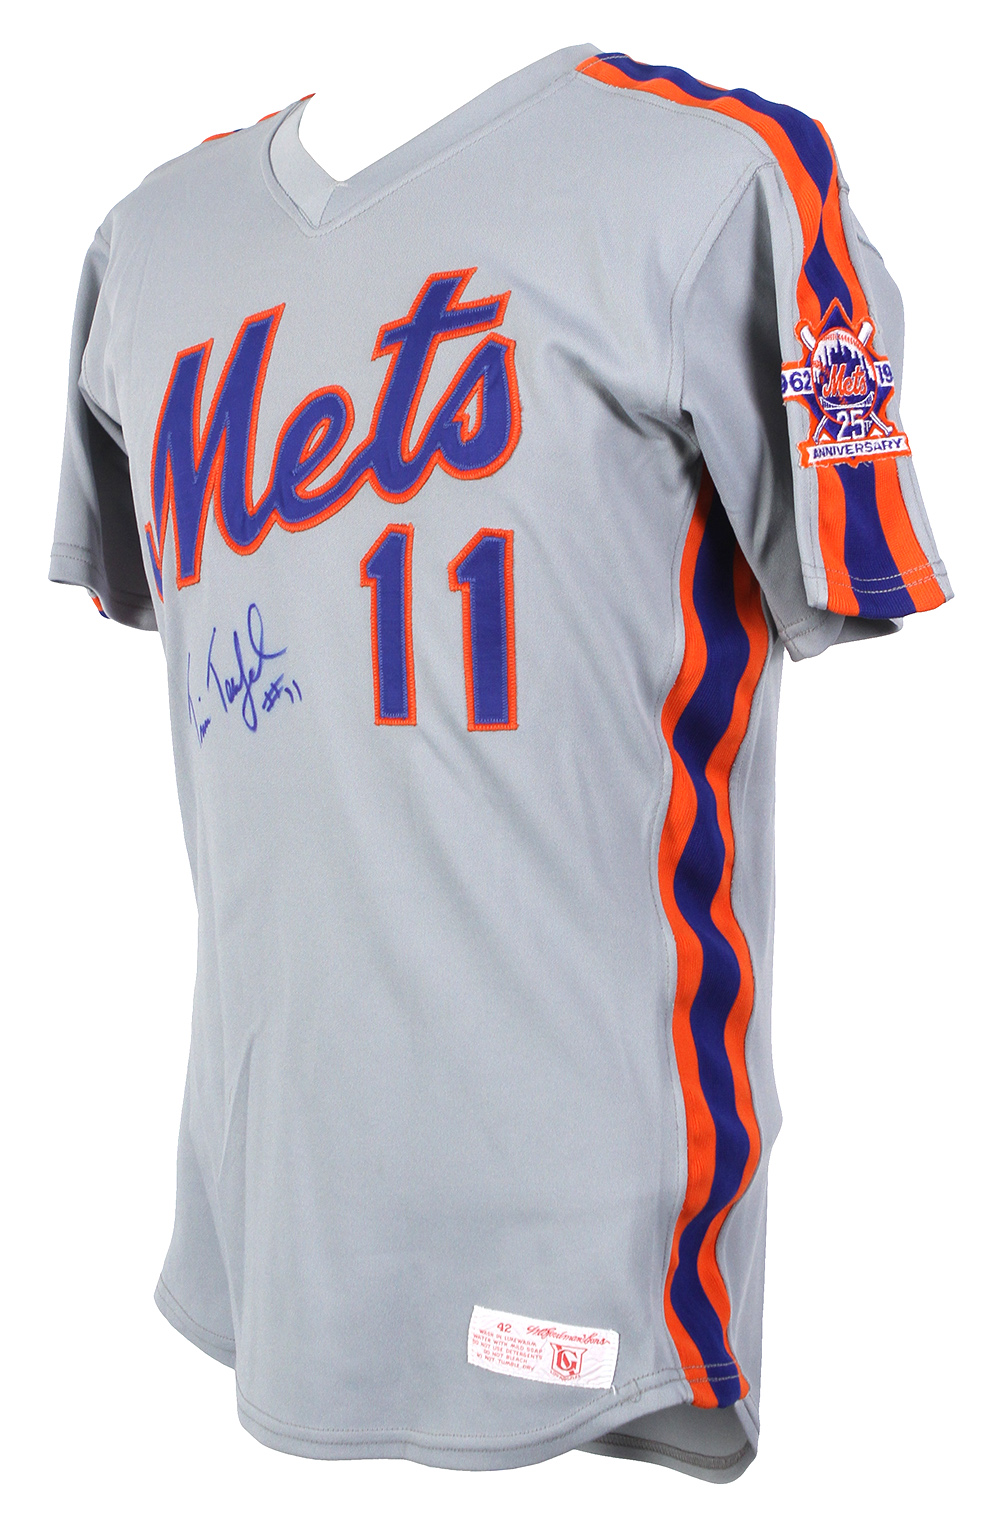 Sold at Auction: NEW YORK METS TEAM SIGNED 1986 jersey STEINER COA